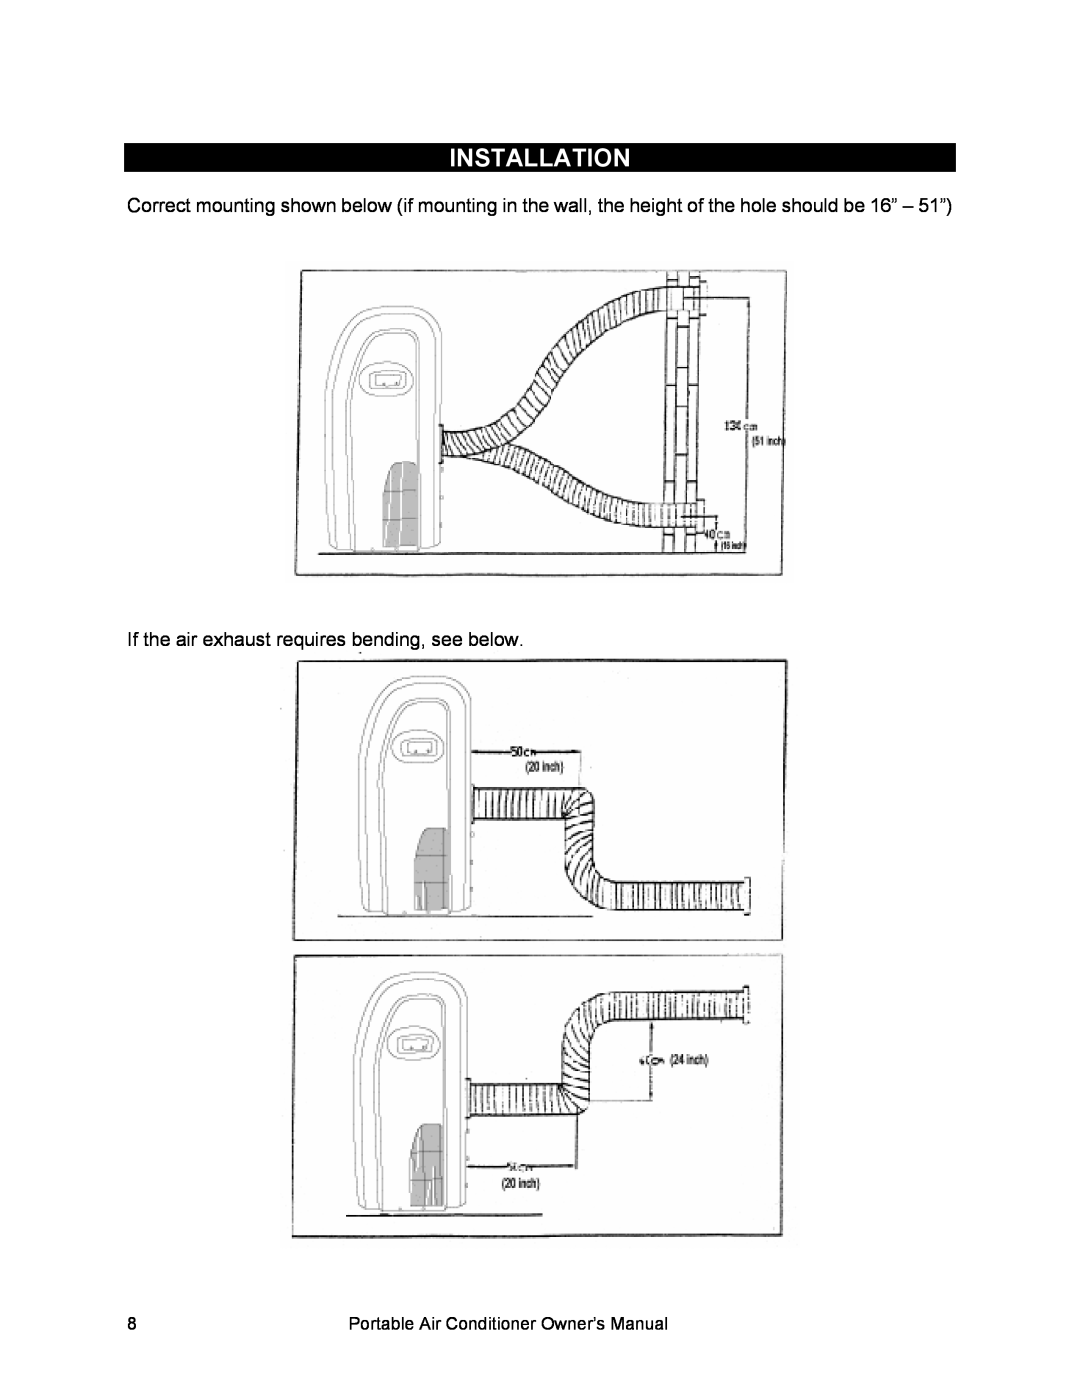 Equator PAC 8, PAC 12, PAC 10 owner manual Installation, If the air exhaust requires bending, see below 